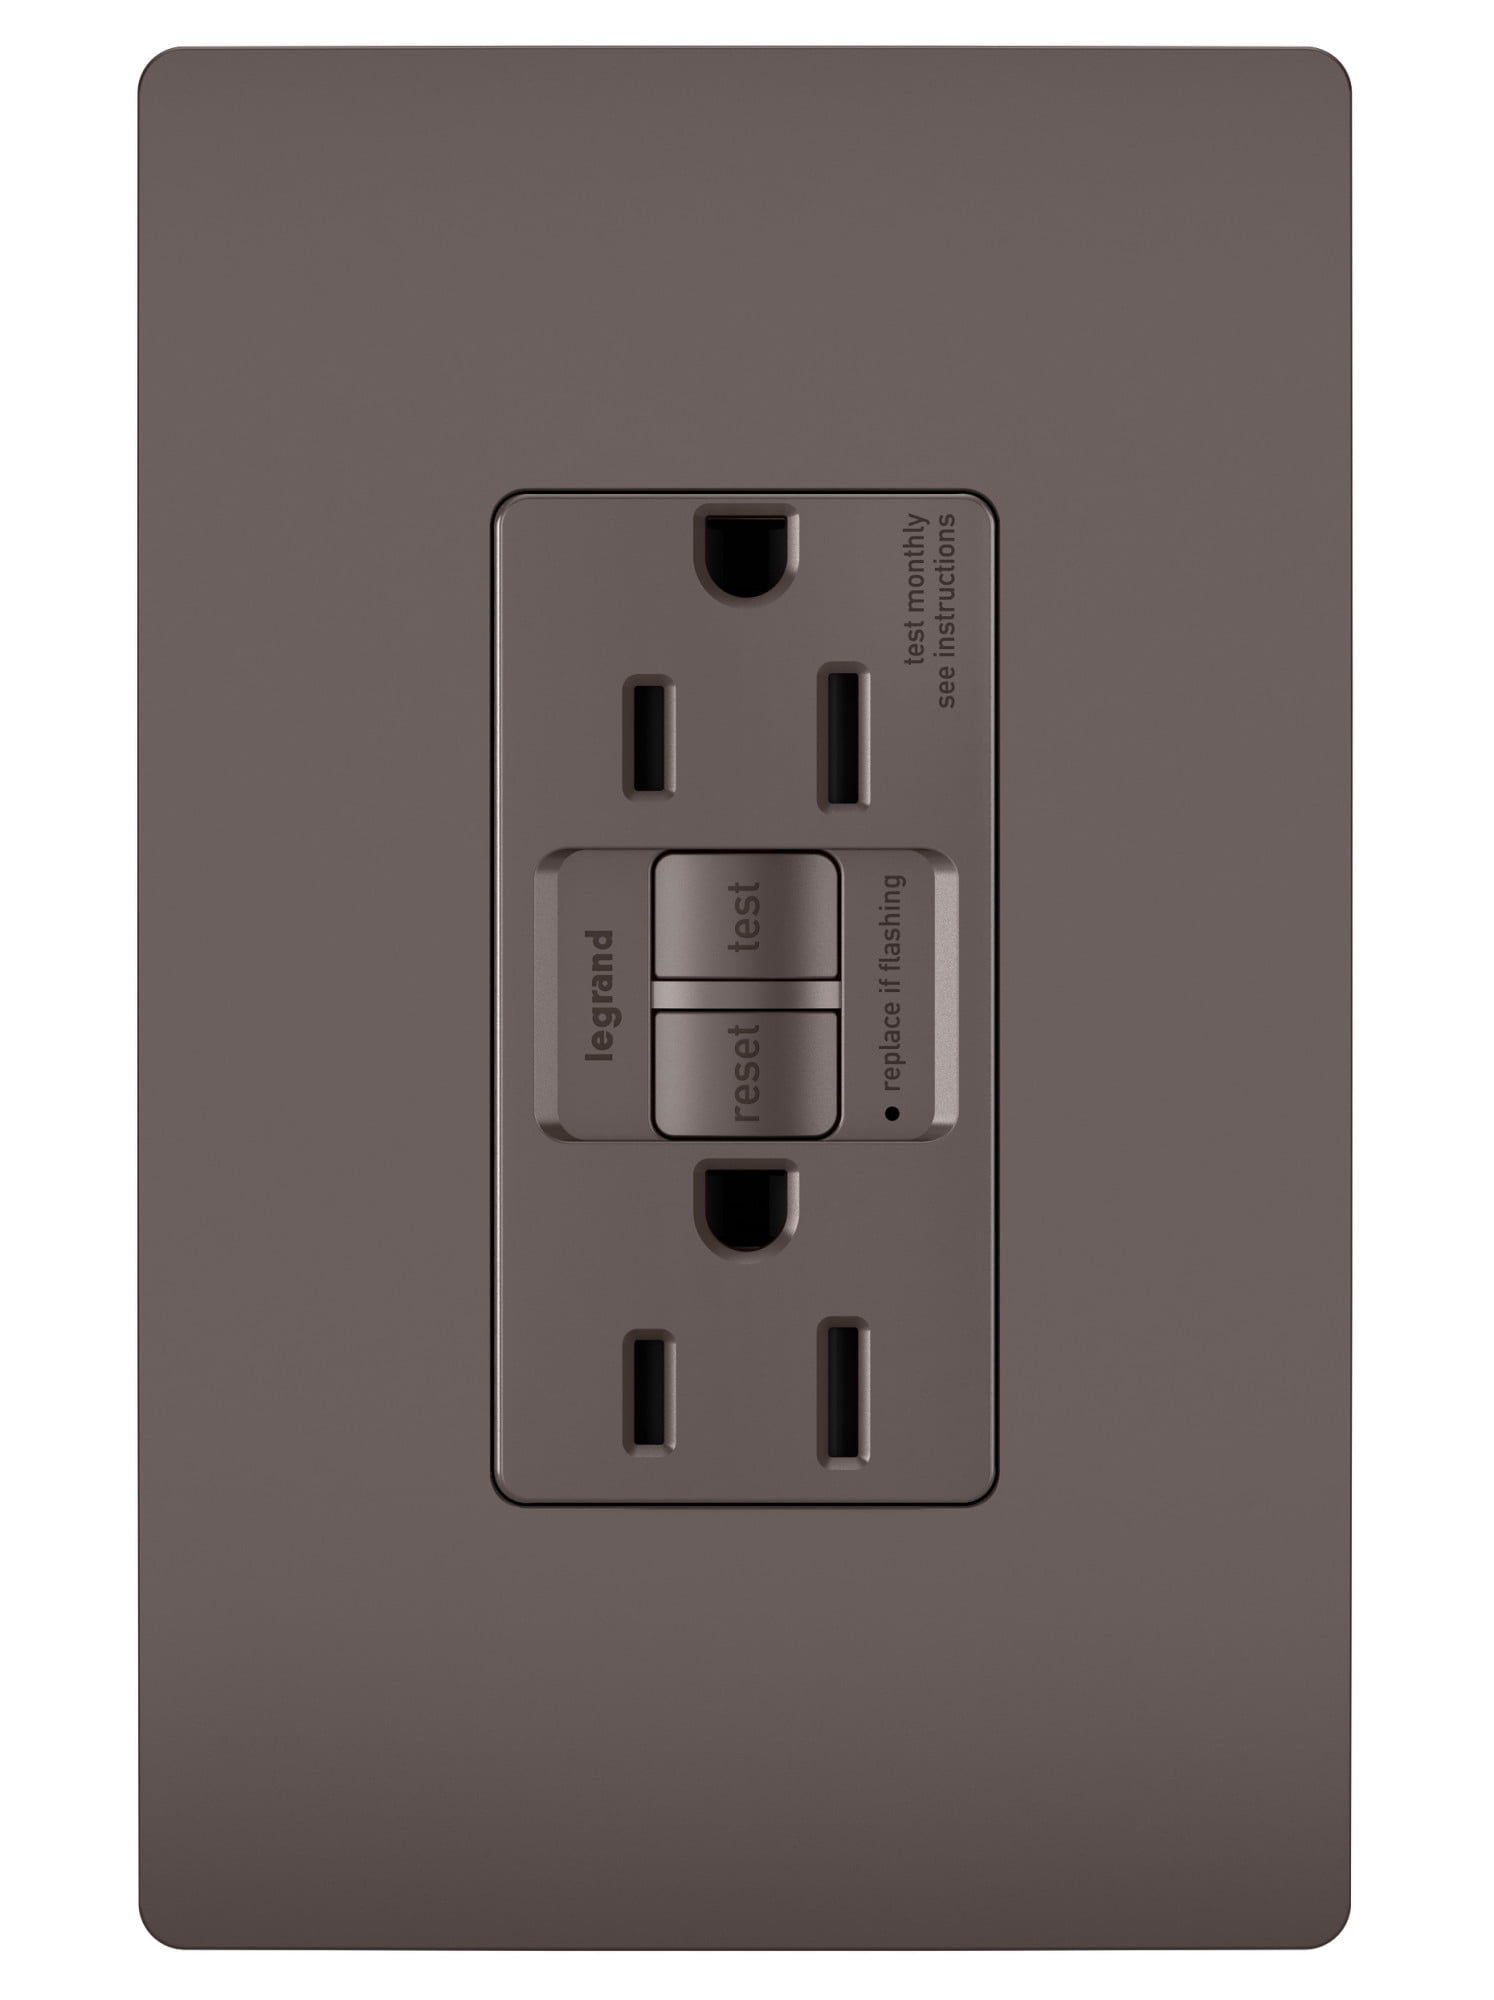 Legrand 1597tr Radiant Gfci Wall Outlet Brown